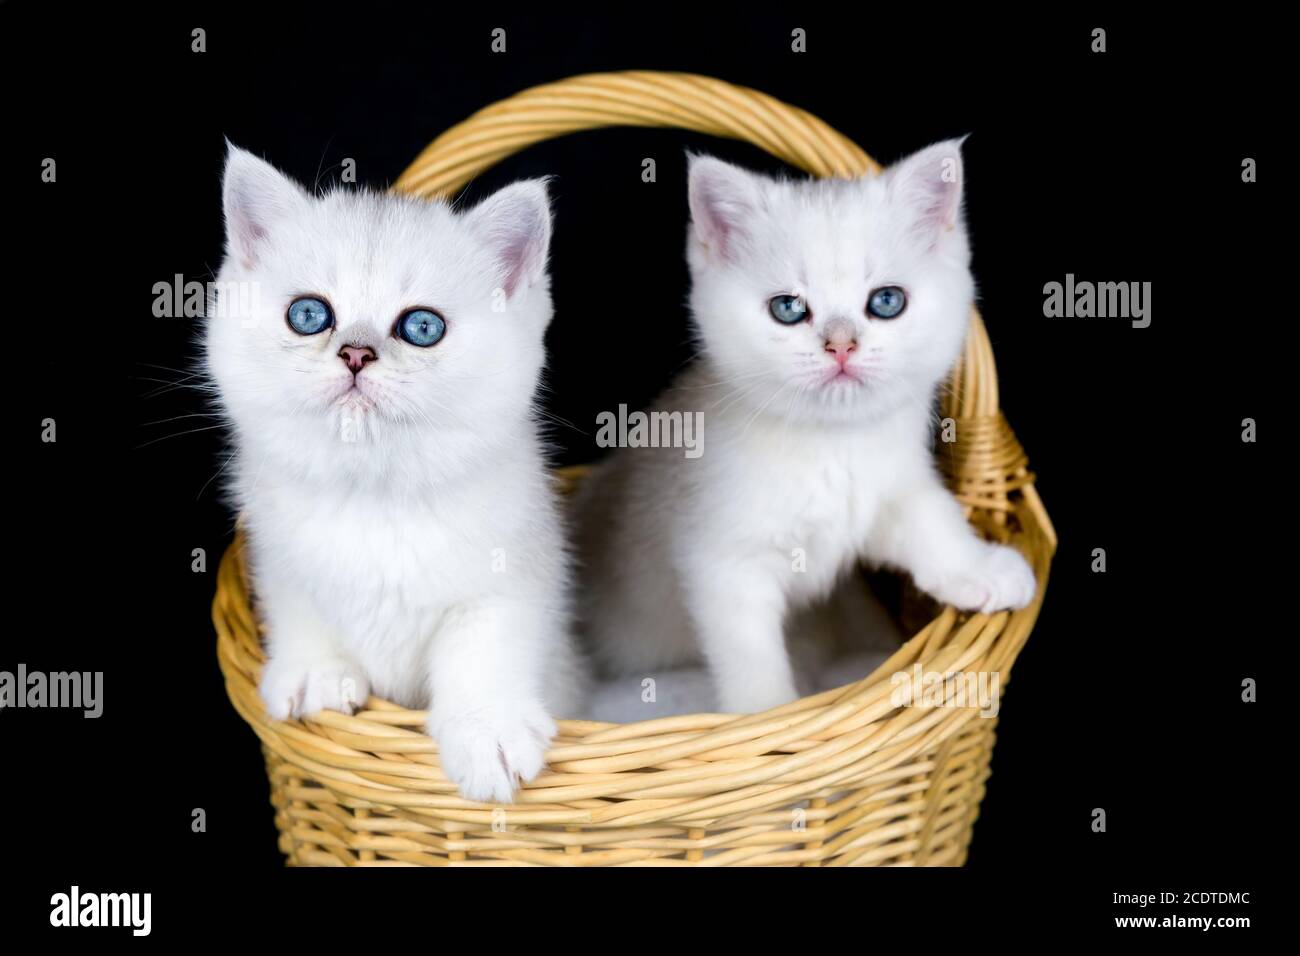 Two white kittens in basket on black background Stock Photo